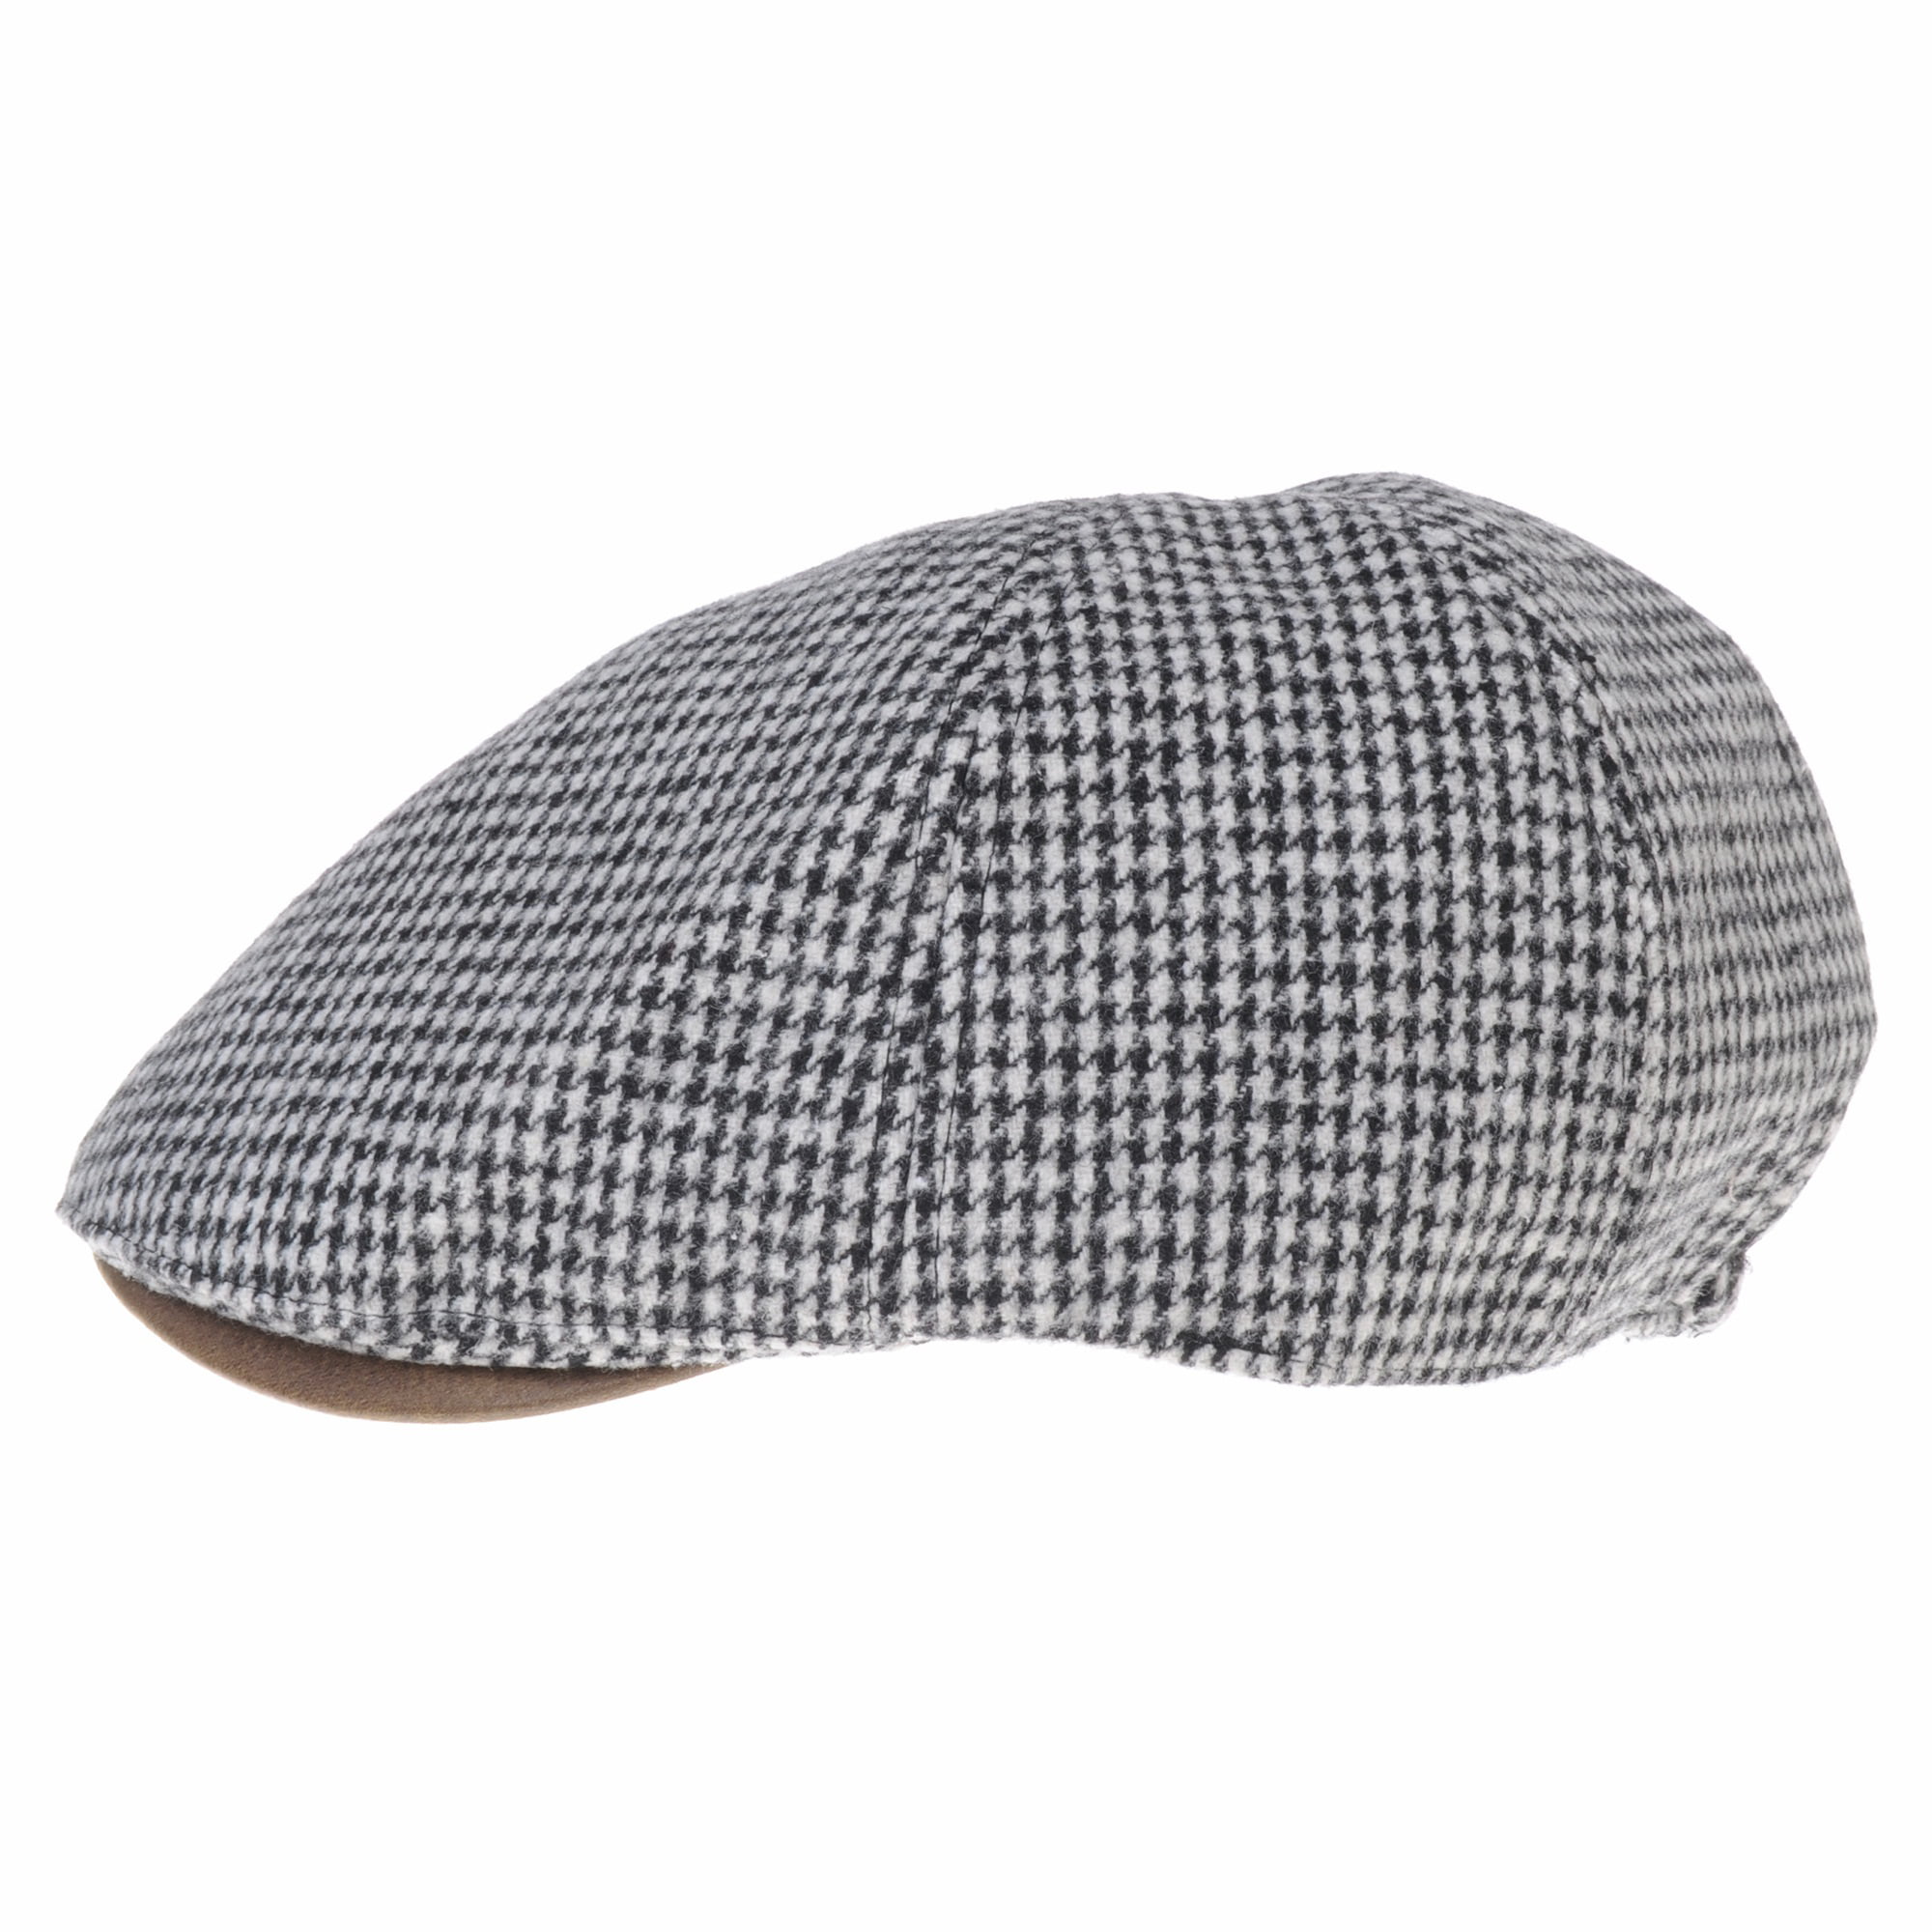 WITHMOONS Béret Casquette Chapeau Winter Tweed Houndstooth Newsboy Hat Faux Leather Brim Flat Cap SL3019